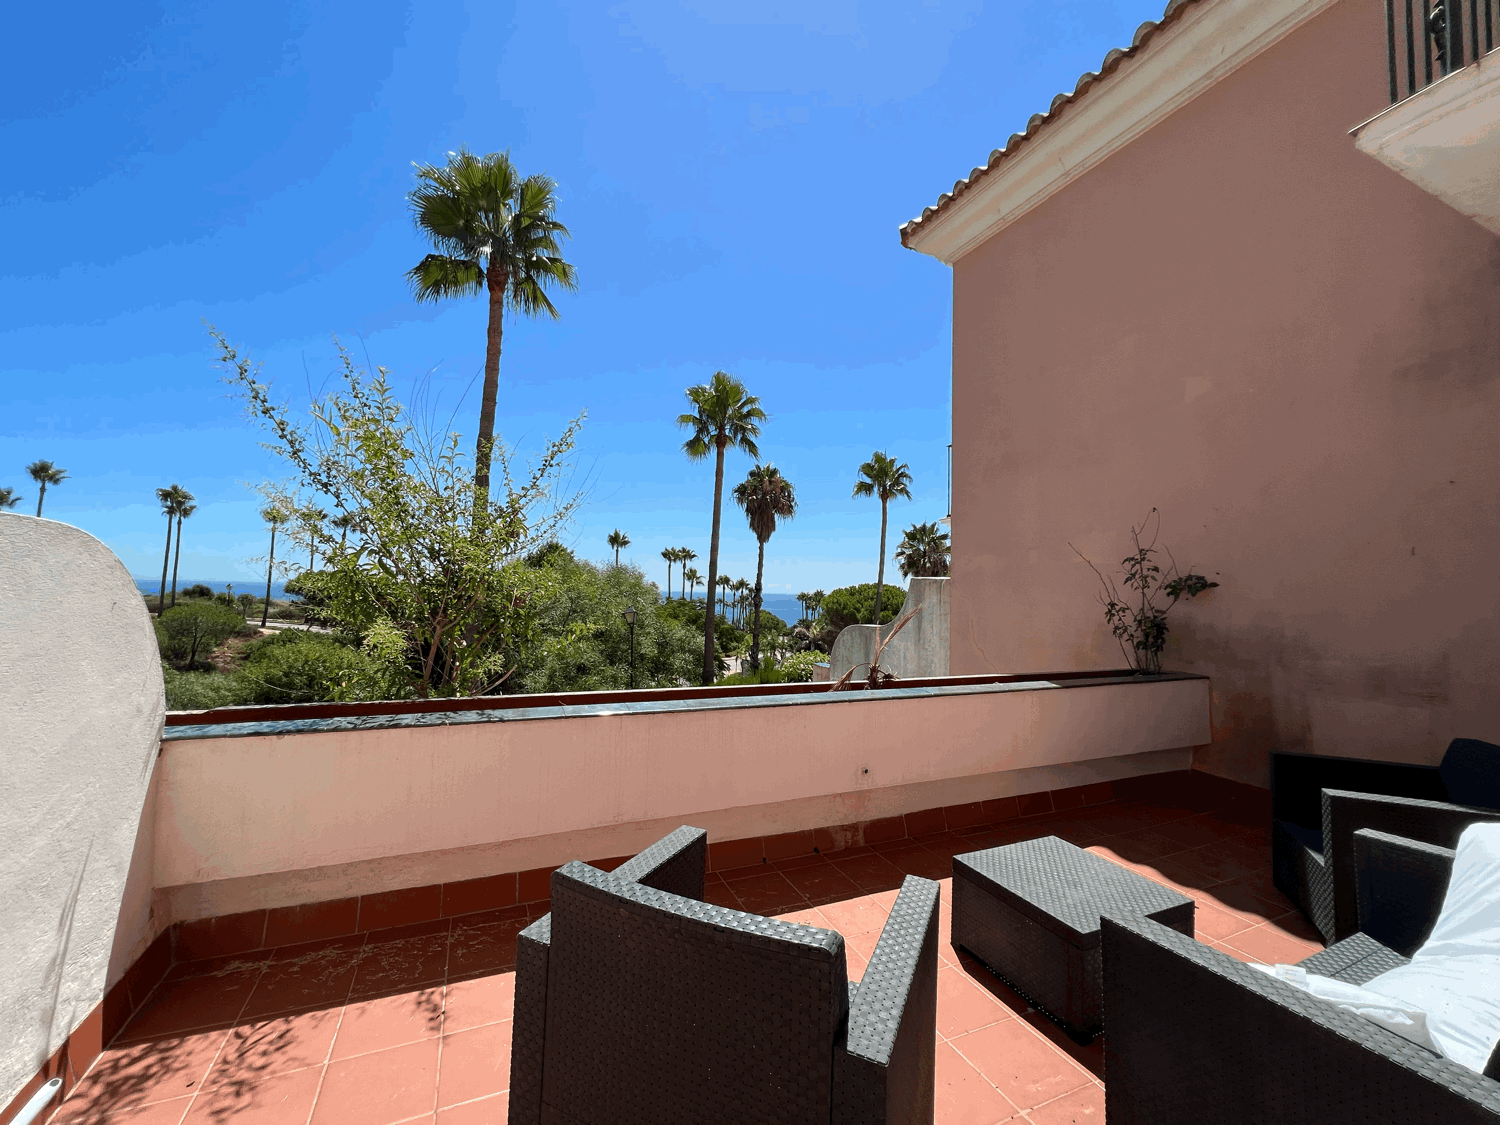 Three-bedroom semi-detached house a few meters from the beach